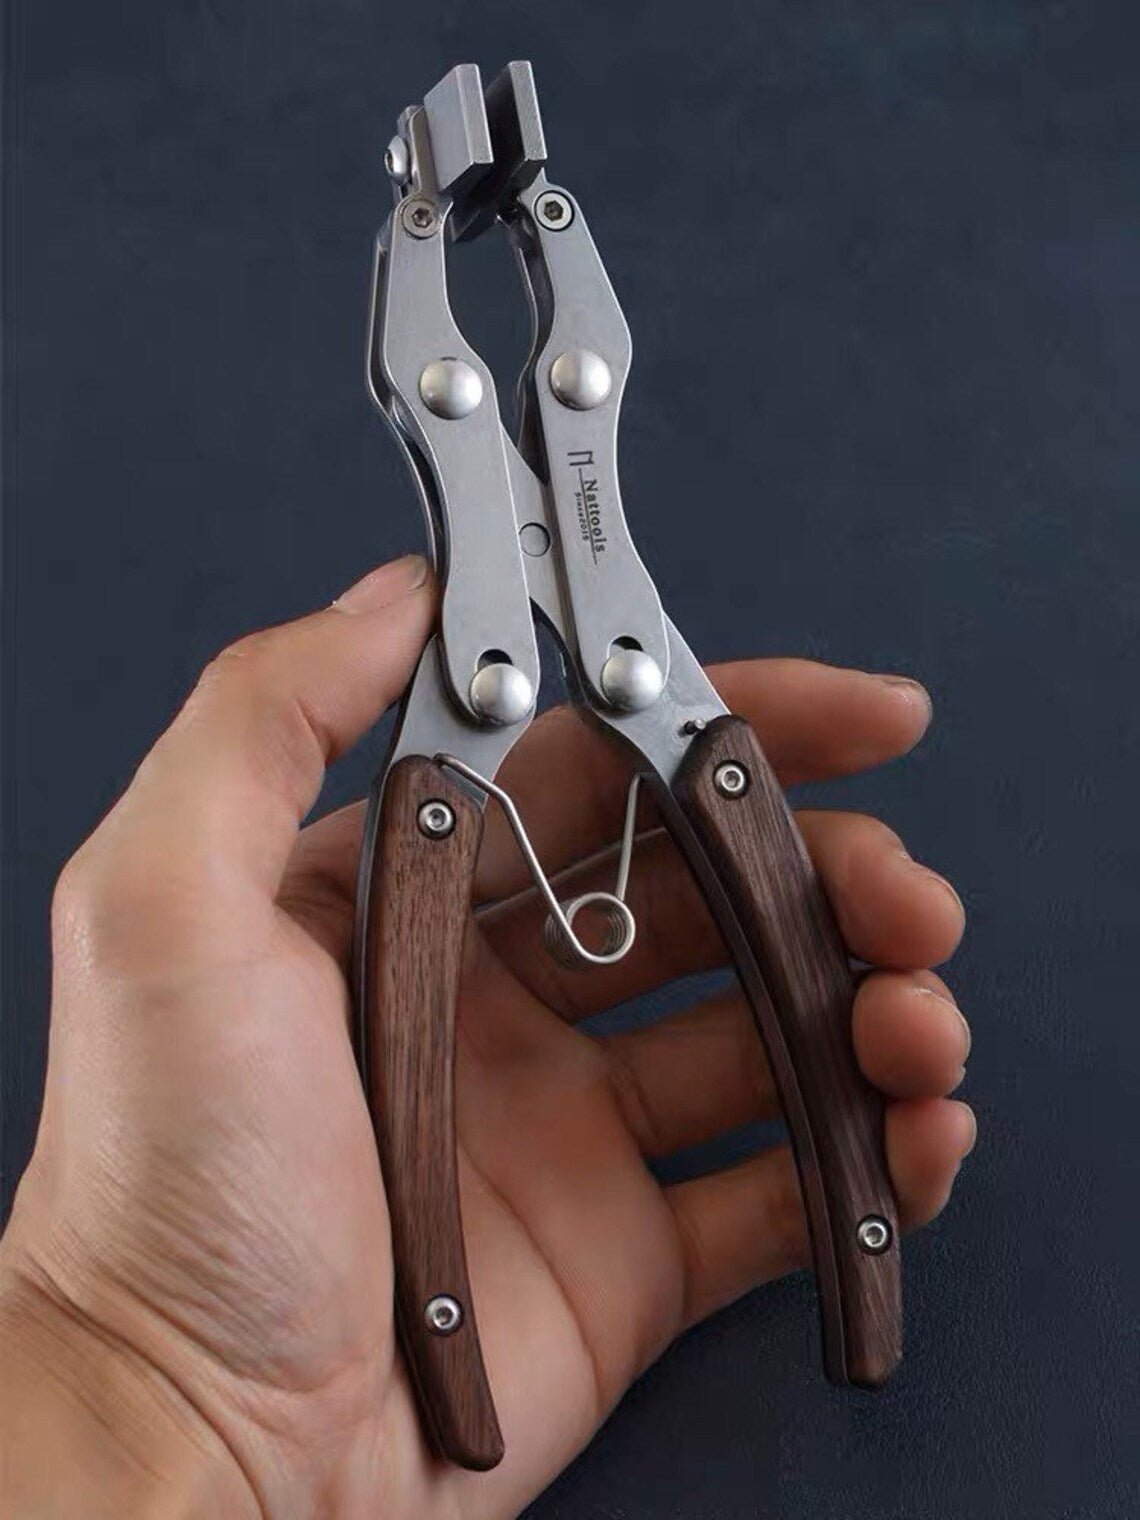 Parallel Clamping Pliers Leather Craft Tools Stitching Press Tool Leather Craft Pliers Parallel Clamping PliersNattools